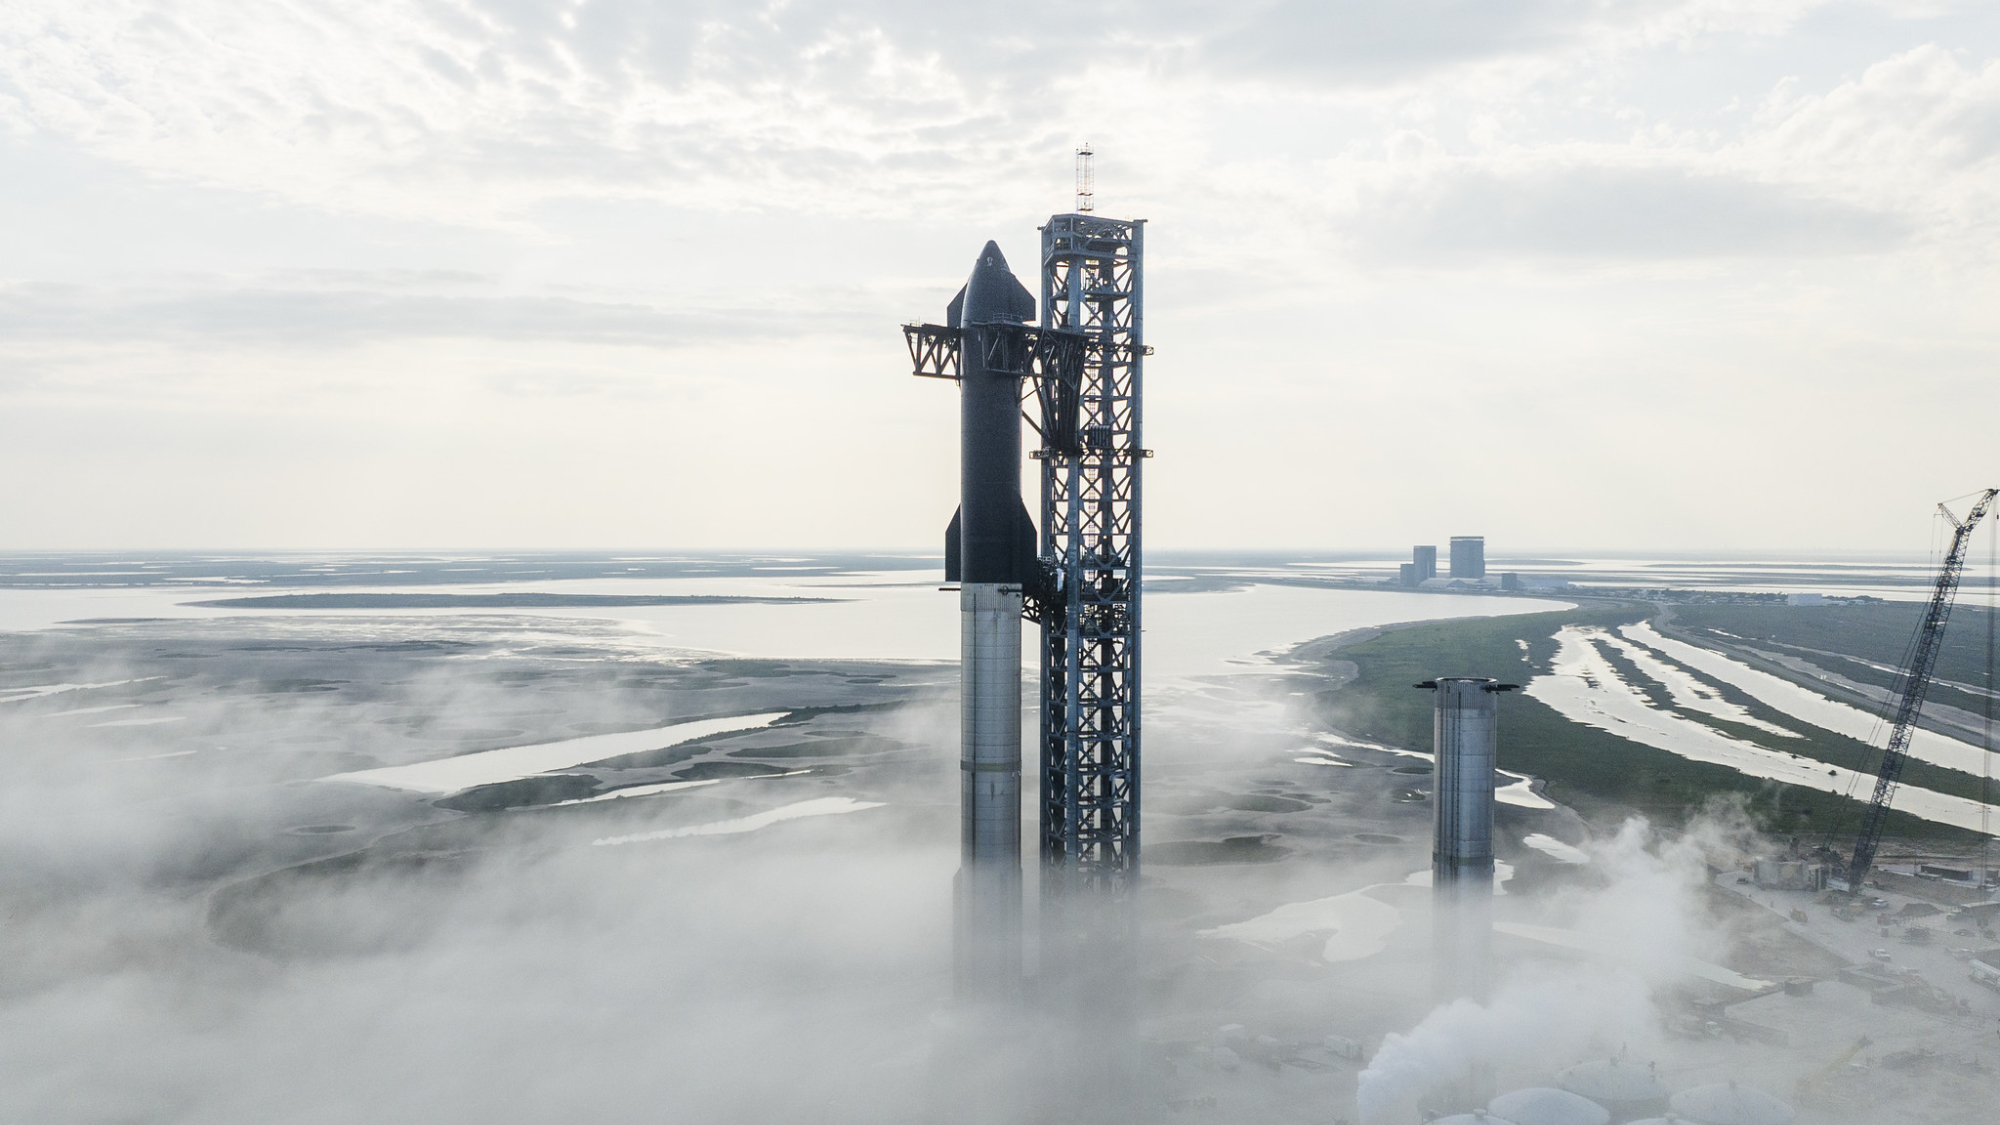 SpaceX posted this photo of its stacked Starship vehicle to Twitter on January 12, 2023.